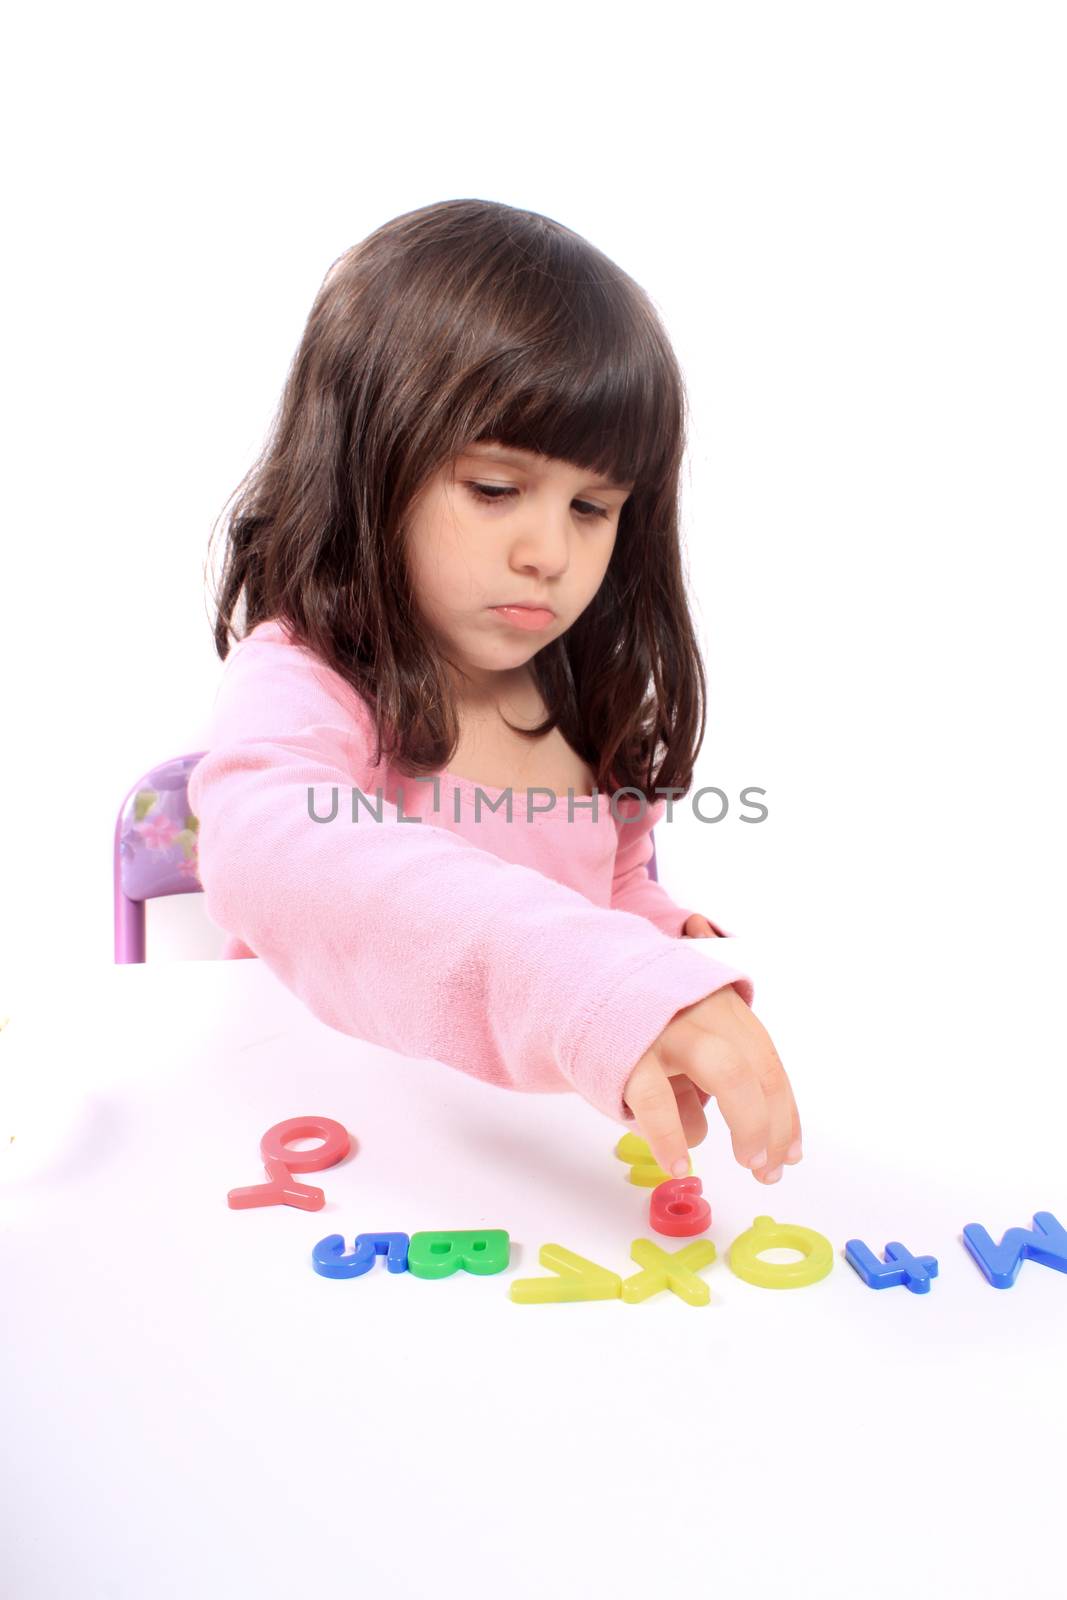 Young little preschool girl with funny expression playing with letters and numbers